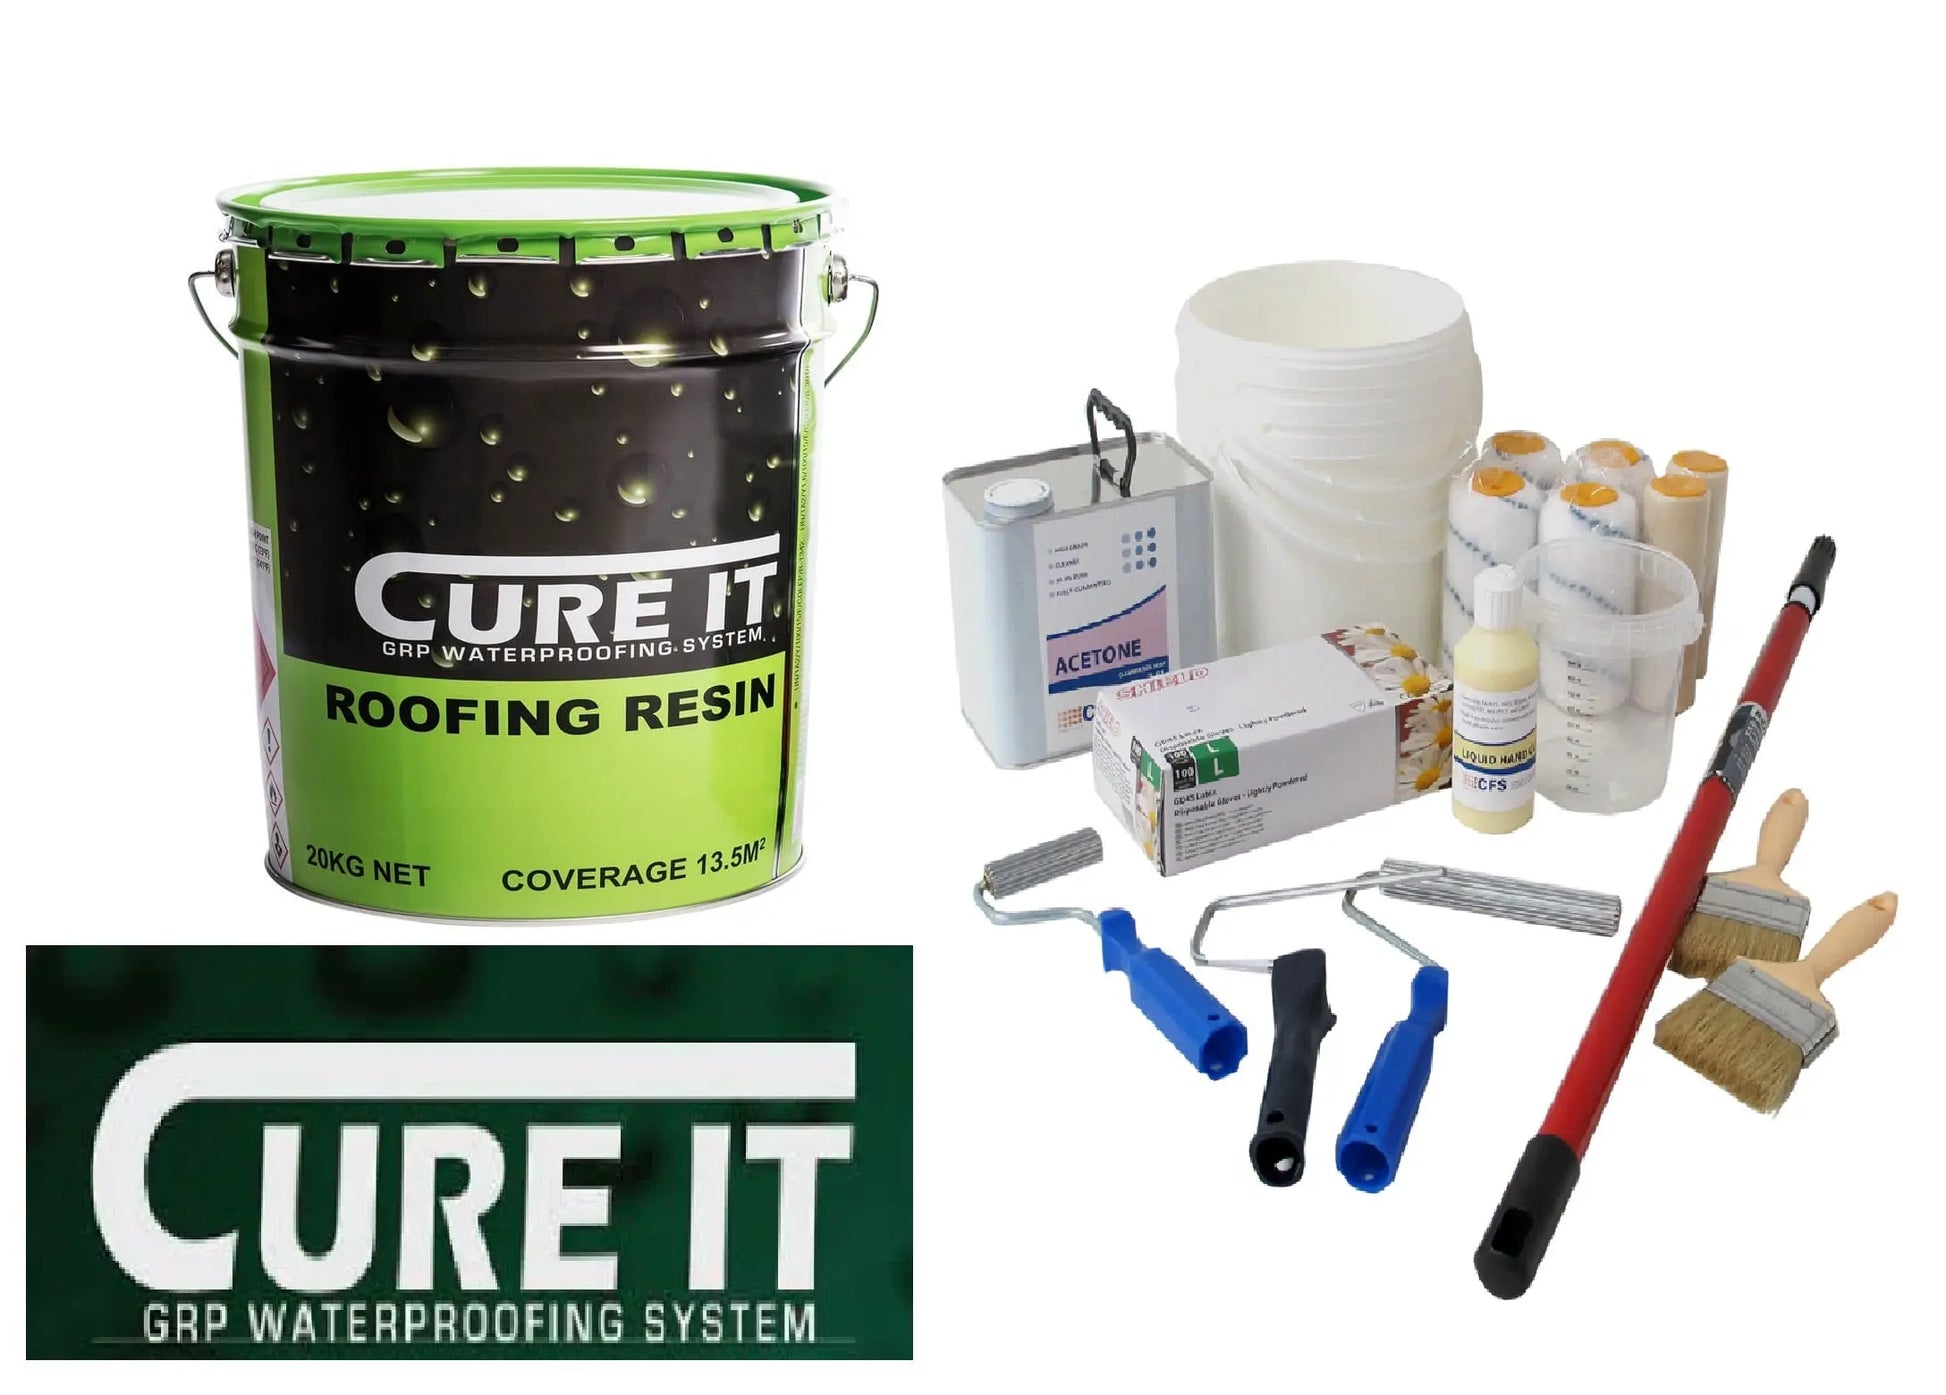 Winter-Cure-It Fire Retardant Grp Roof Kits   600grm matting  (Resin/Topcoat / Catalyst are Cure it /all other items in the kit are our own High Quality brand) Free Shipping Apex Fibreglass Roofing Supplies Ltd